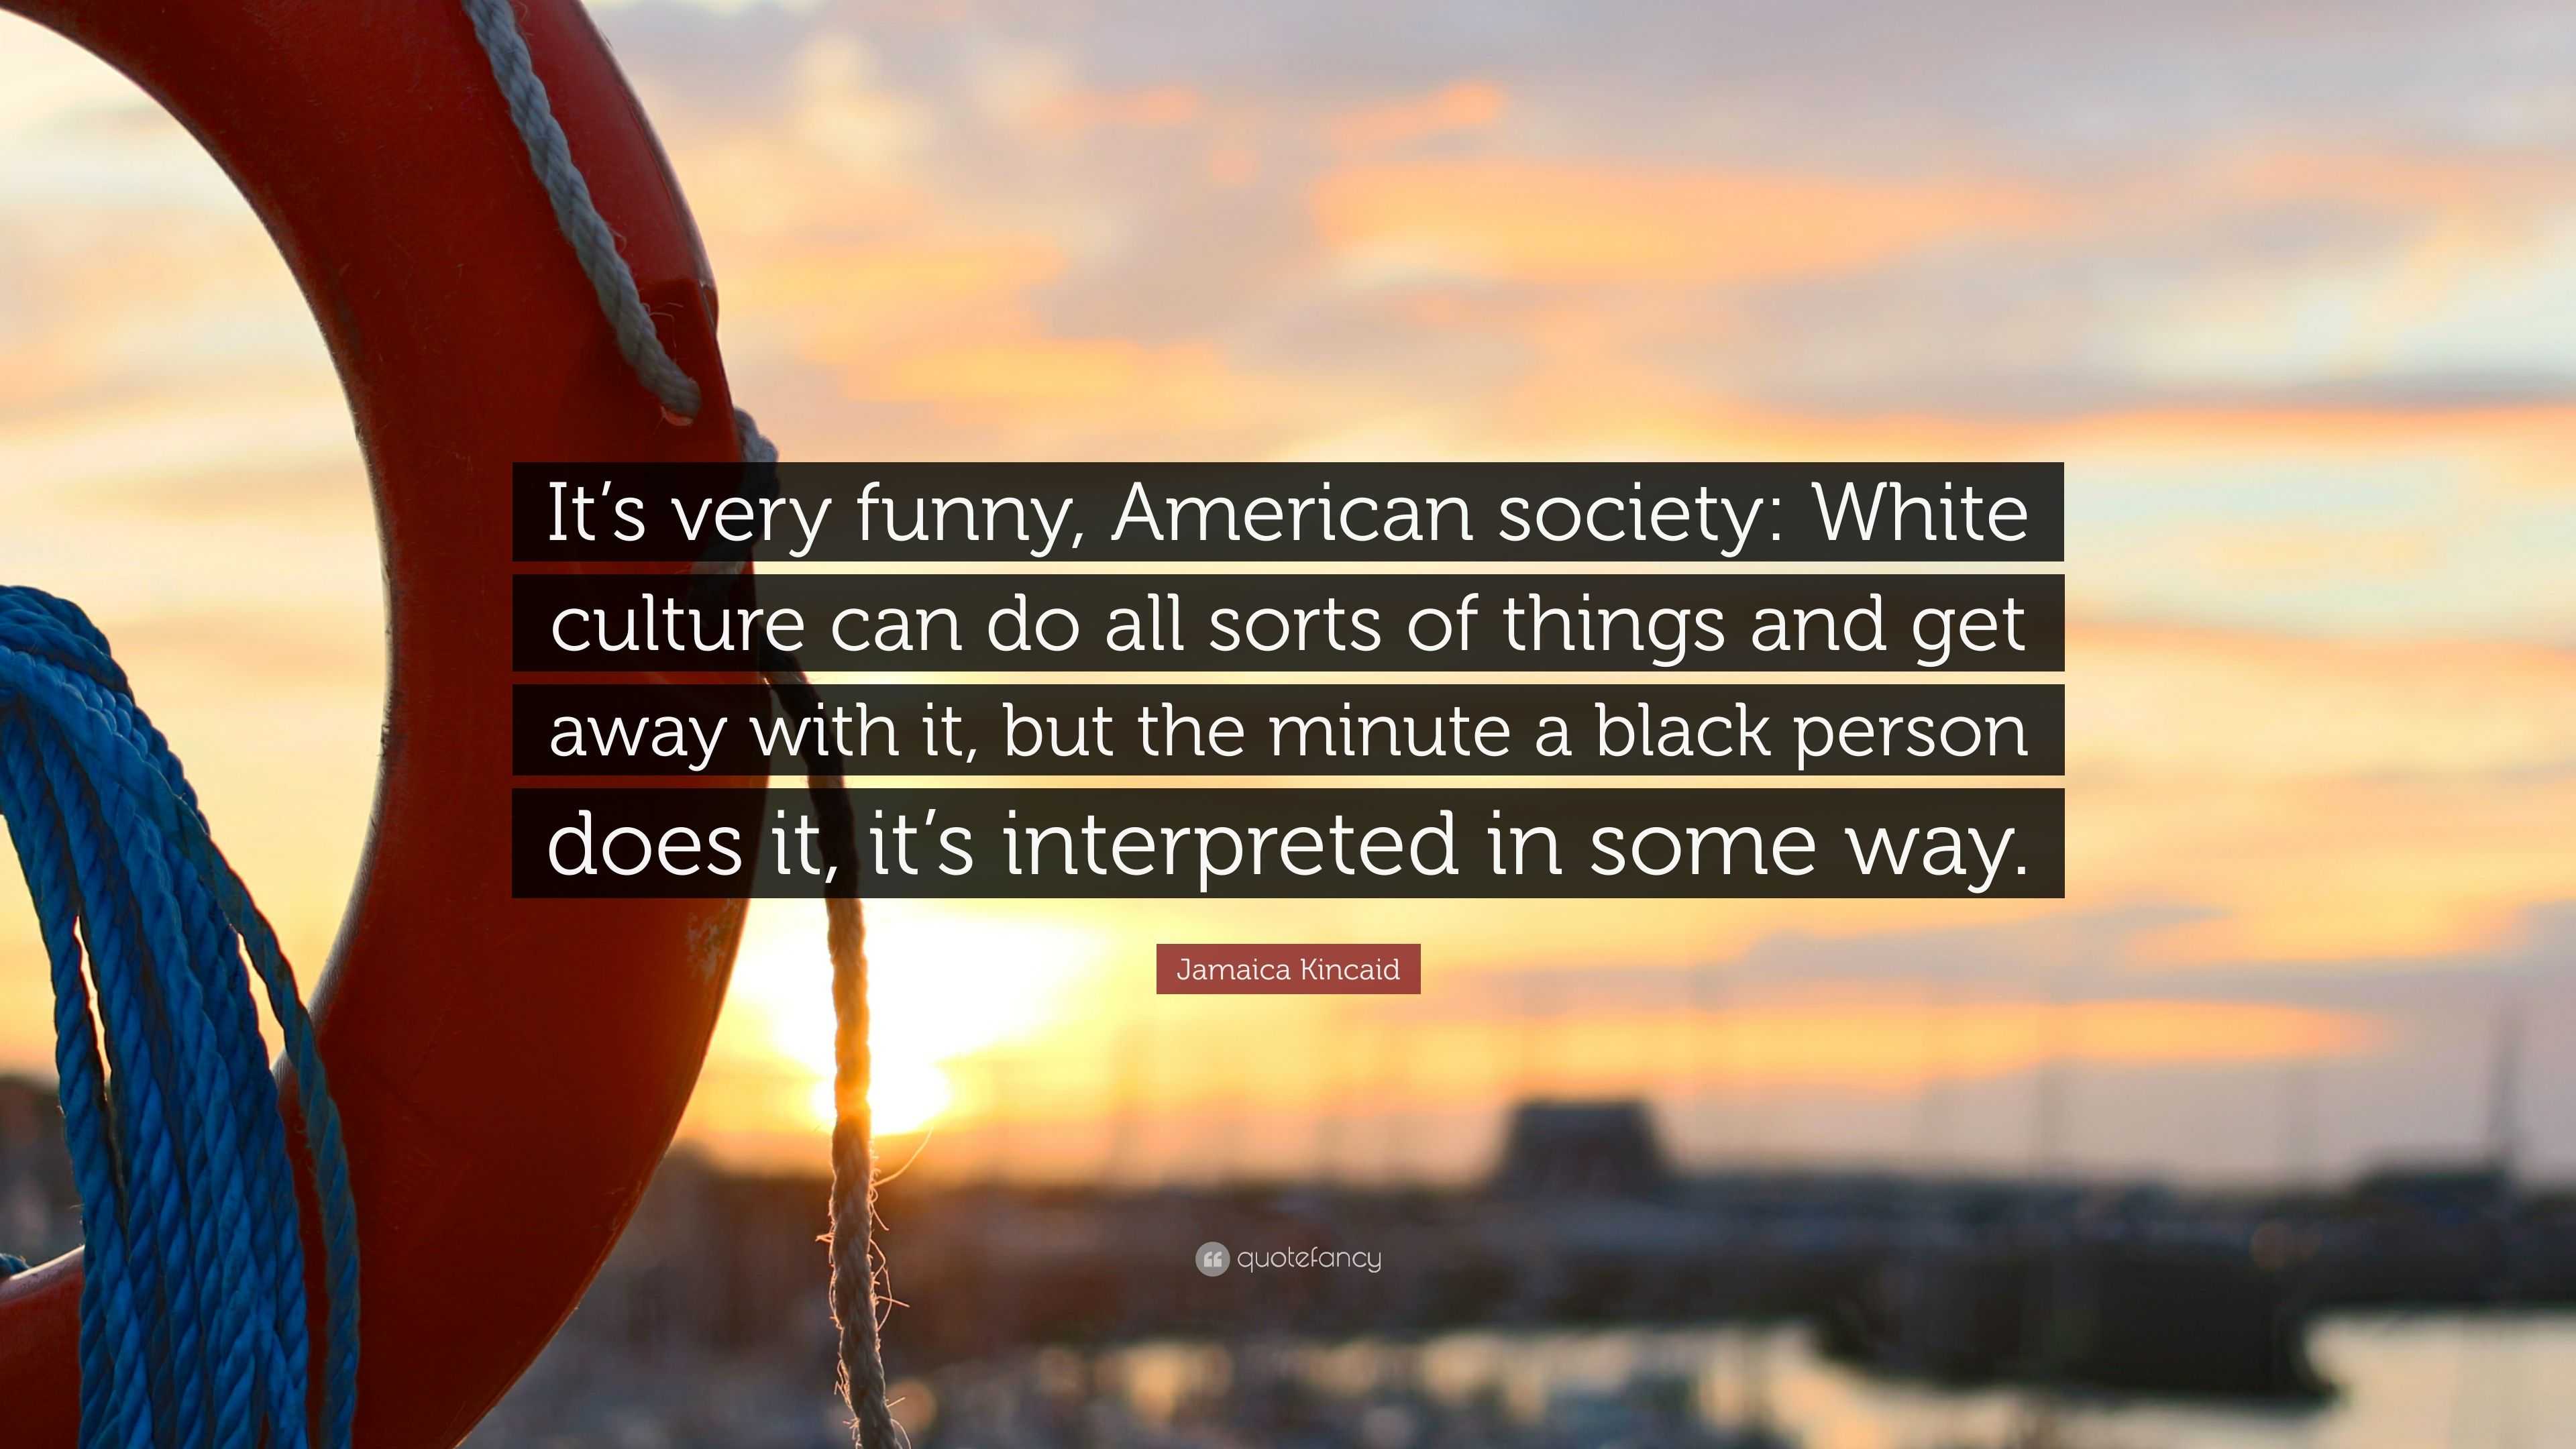 Jamaica Kincaid Quote: “It's very funny, American society: White culture  can do all sorts of things and get away with it, but the minute a black...”